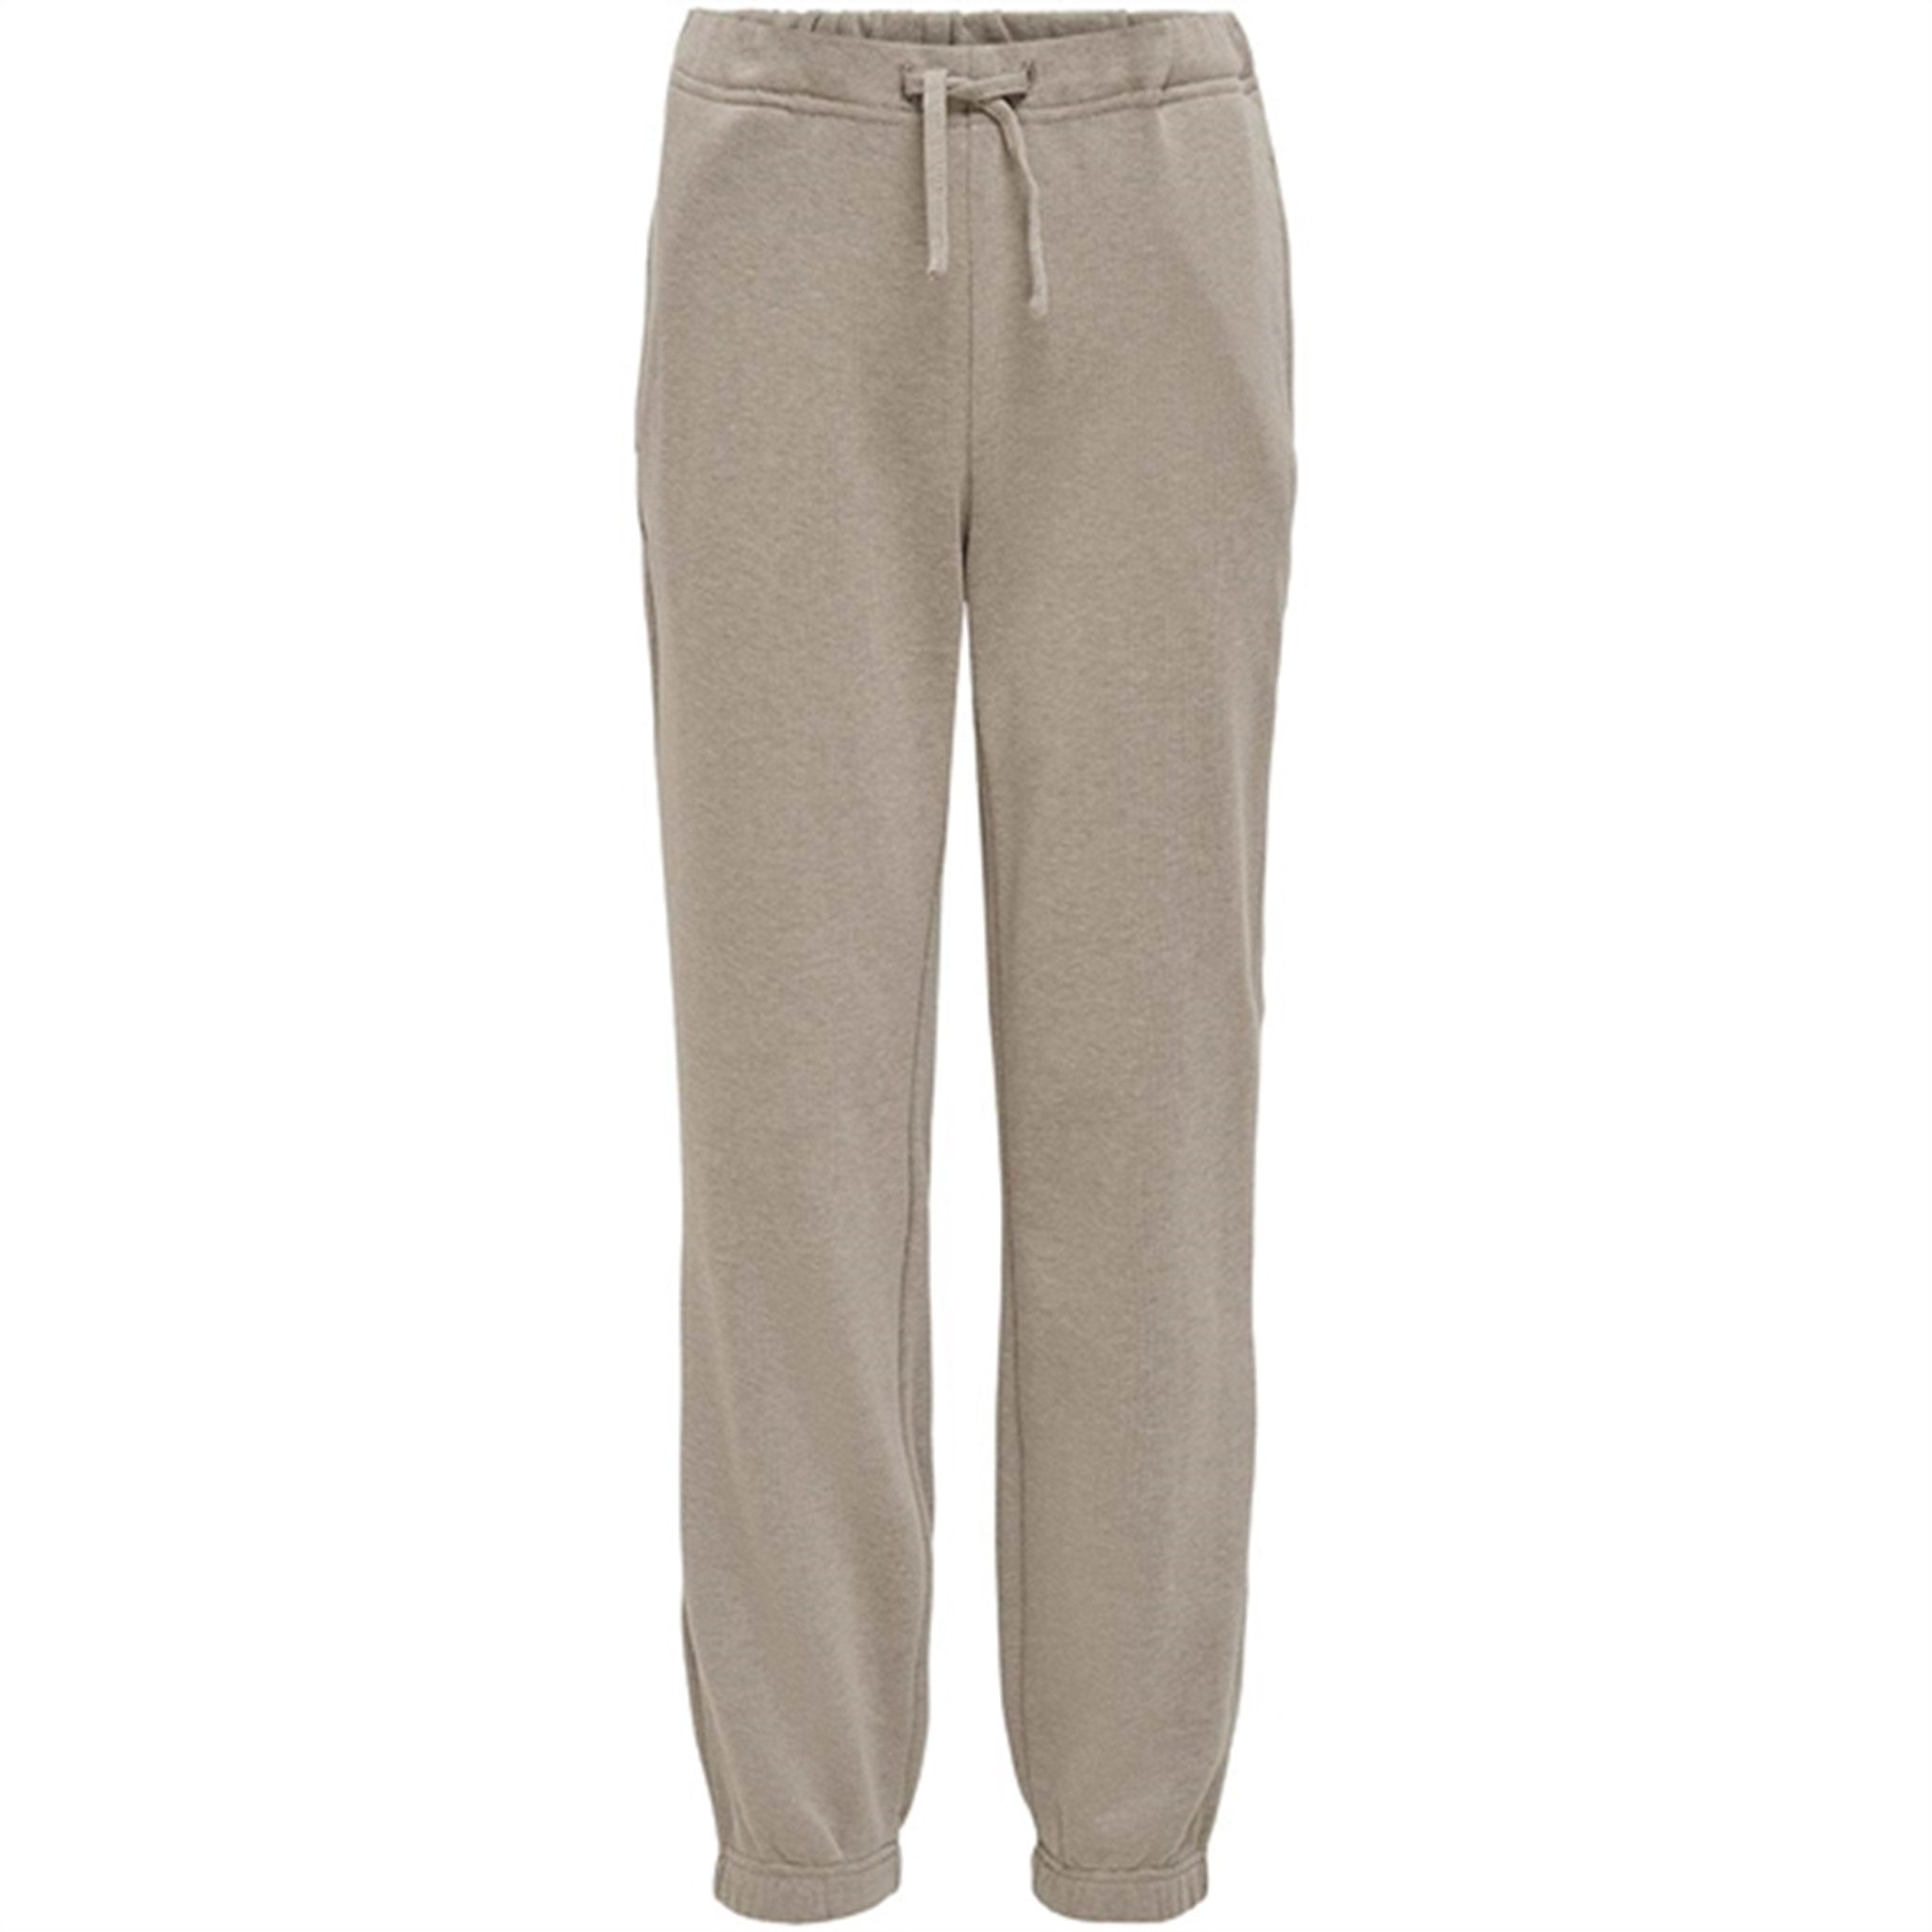 Kids ONLY Pure Cashmere Pull-Up Pants